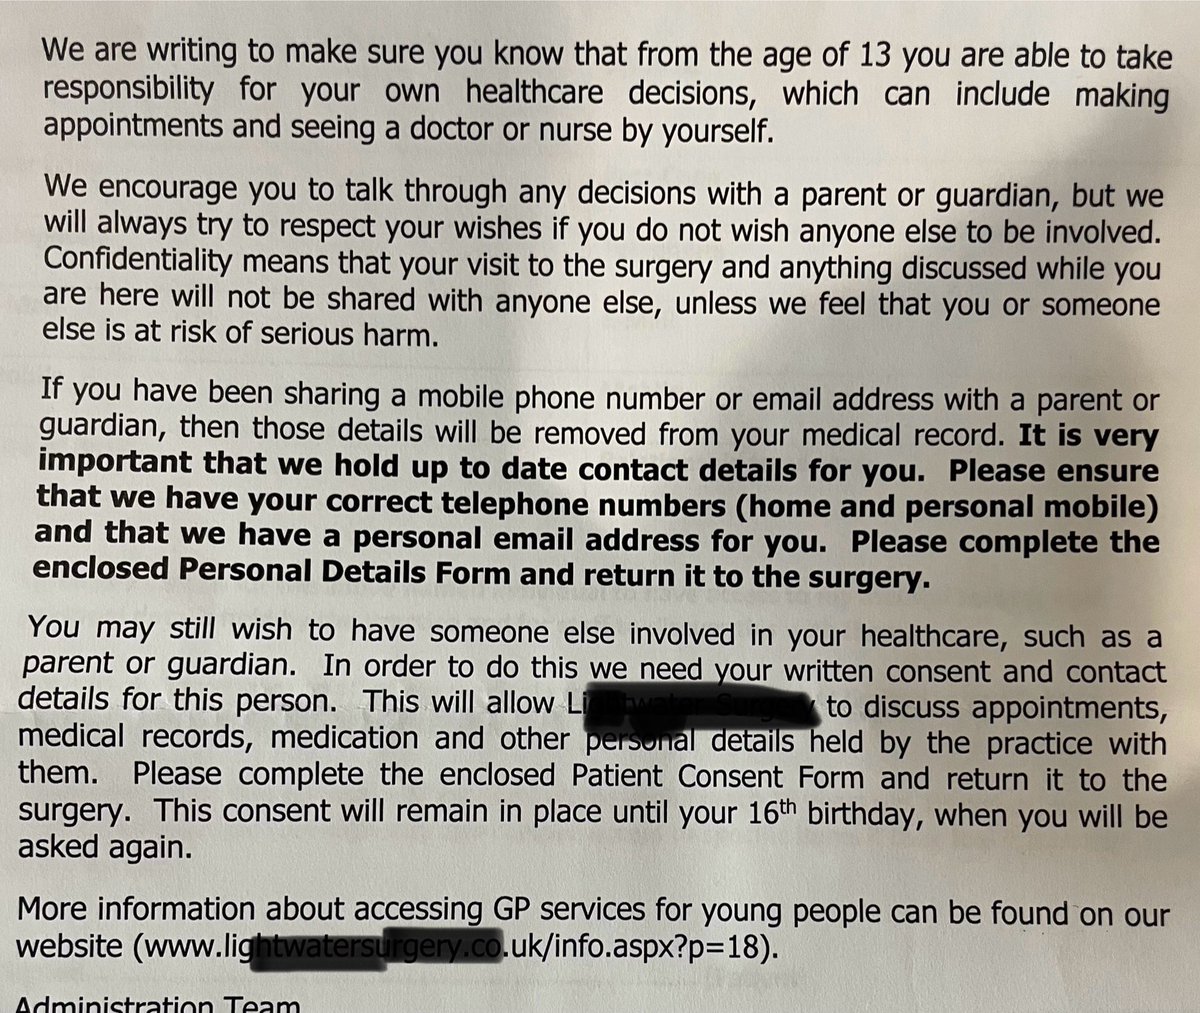 My 12 year old son received this letter from our GP practice this morning. Is there anyone else out there who’s 12 year old received anything like this before their 13th birthday? I’m shocked. This is so sinister.